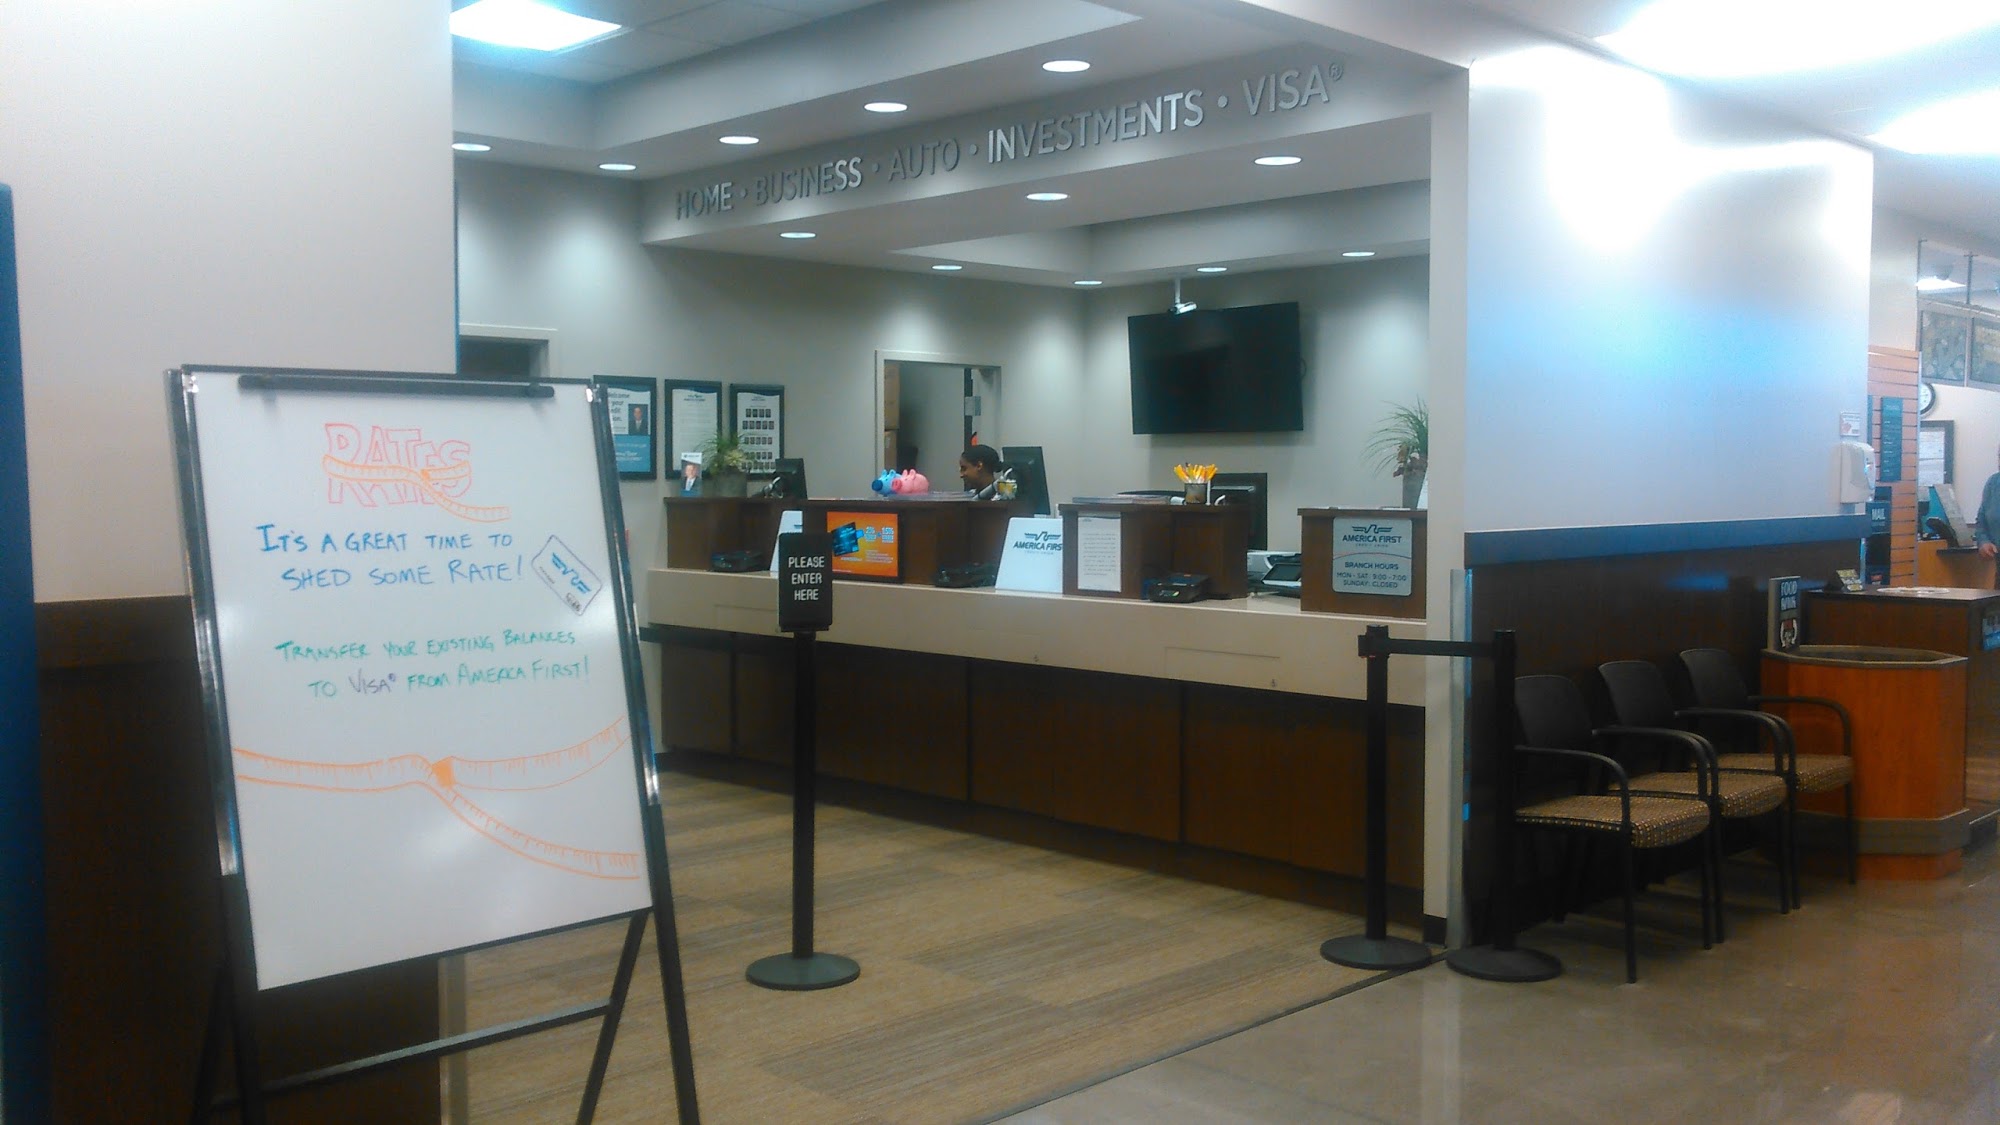 America First Credit Union (inside Harmons)